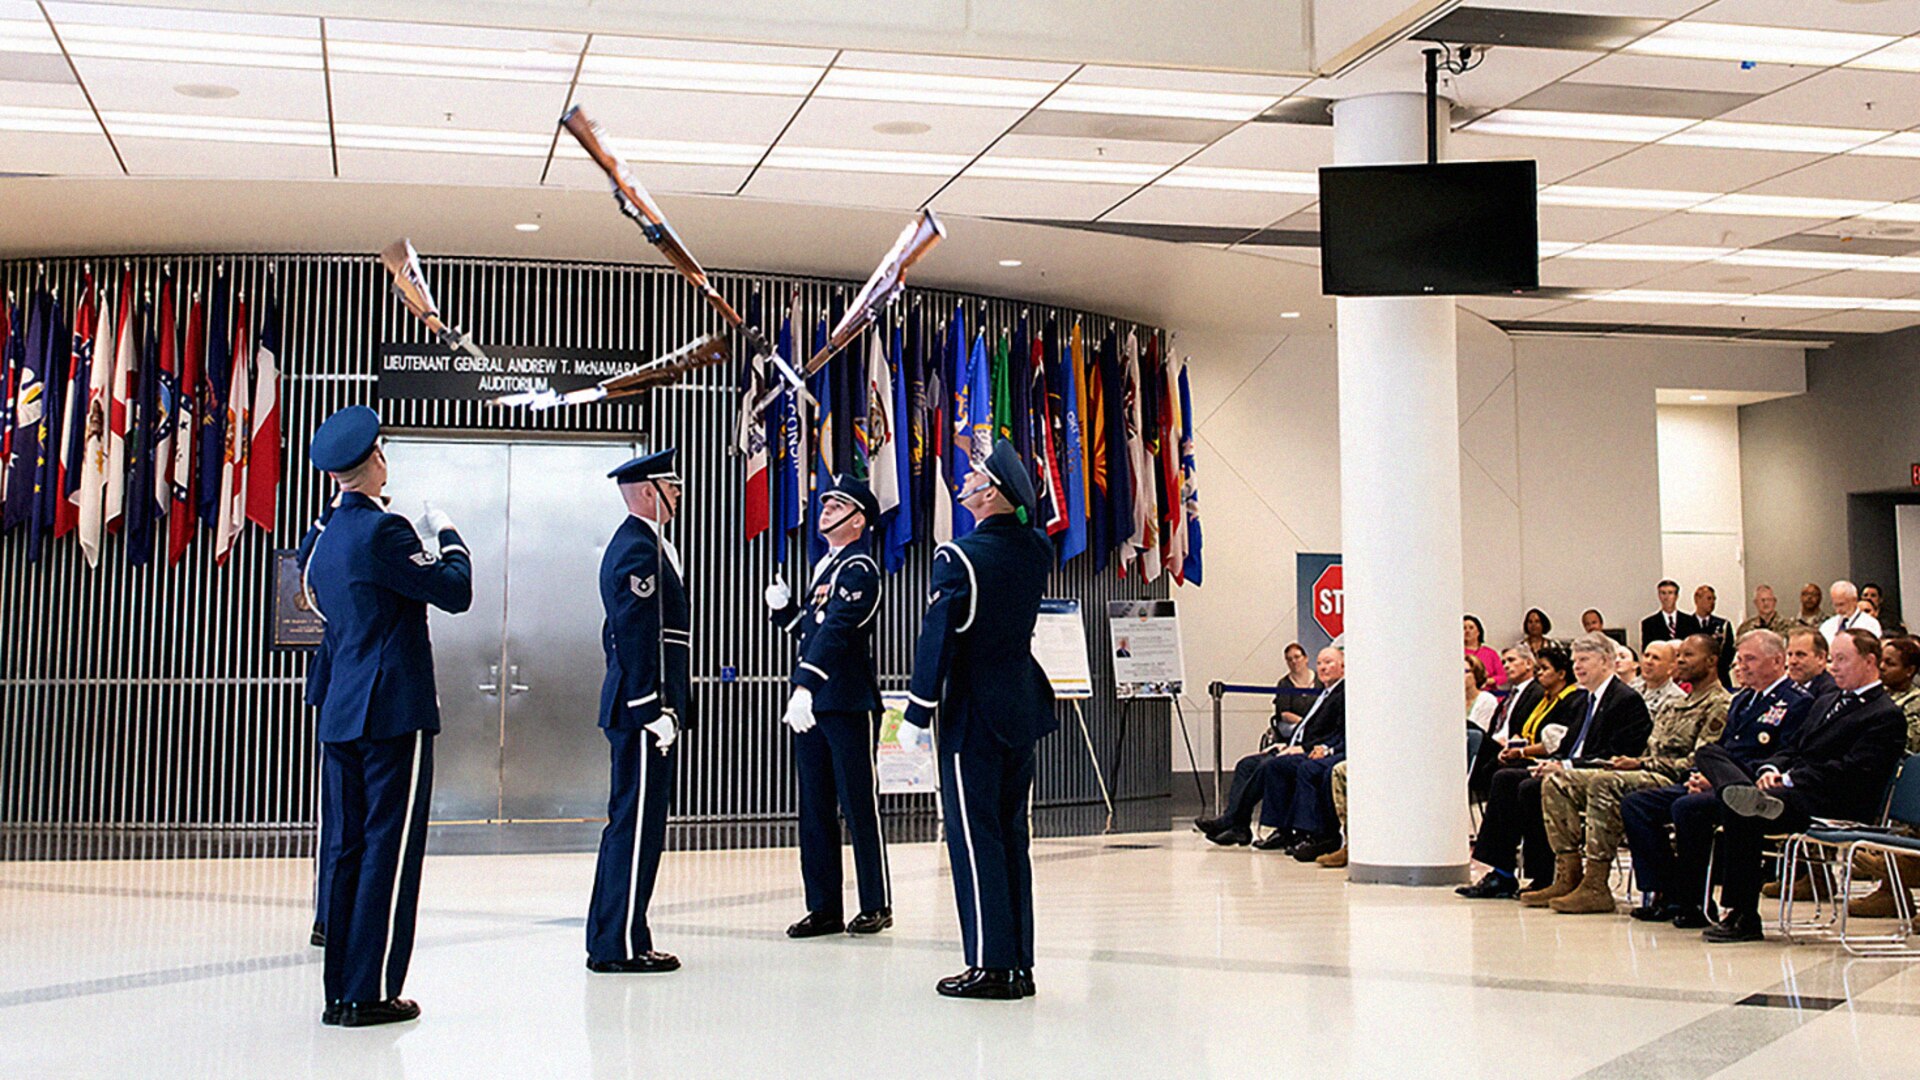 Members of the Air Force Honor Guard Drill Team toss bayonets during their performance as audience watches.